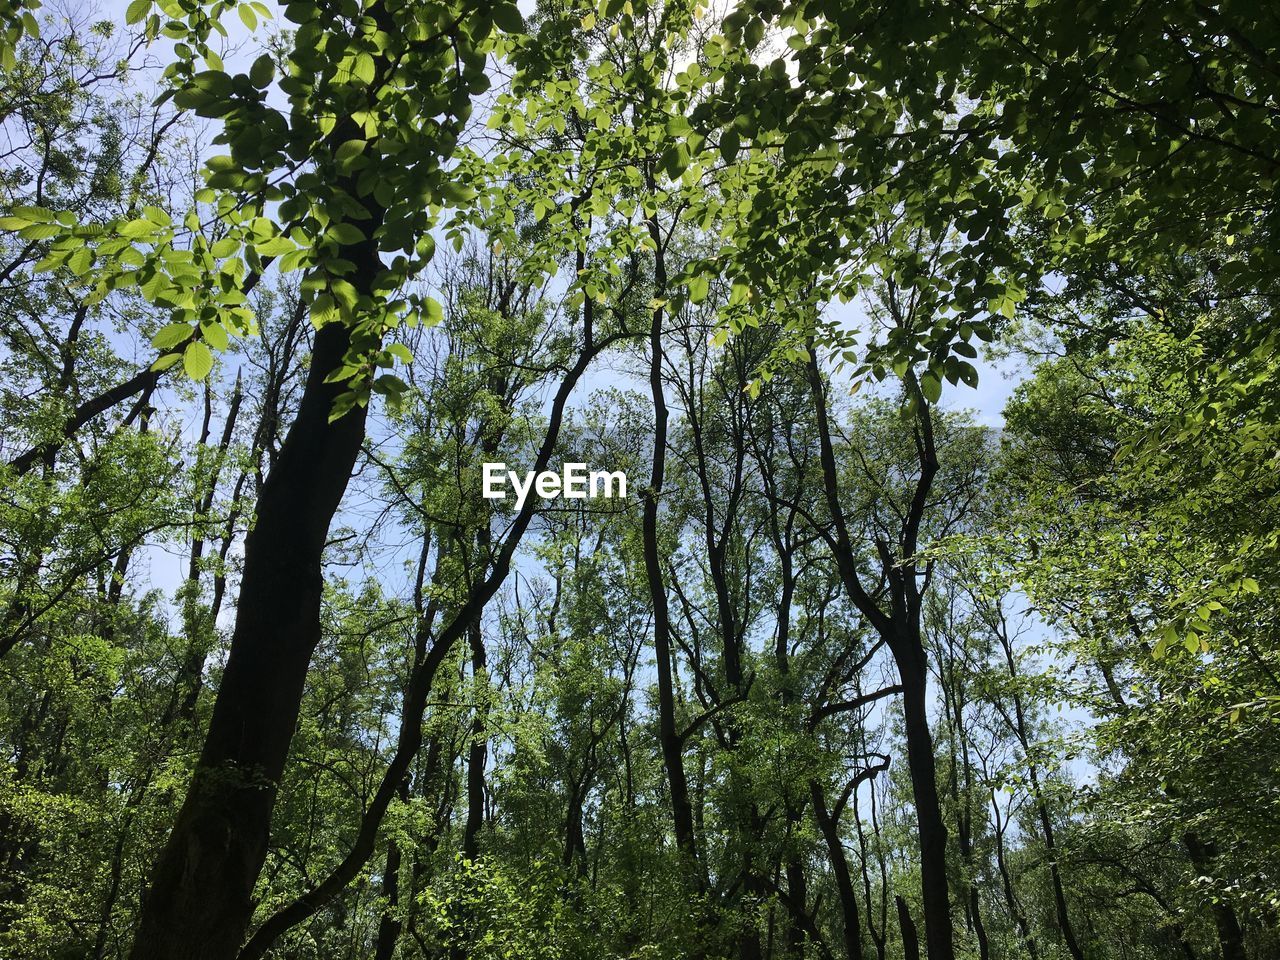 LOW ANGLE VIEW OF TREES GROWING IN FOREST